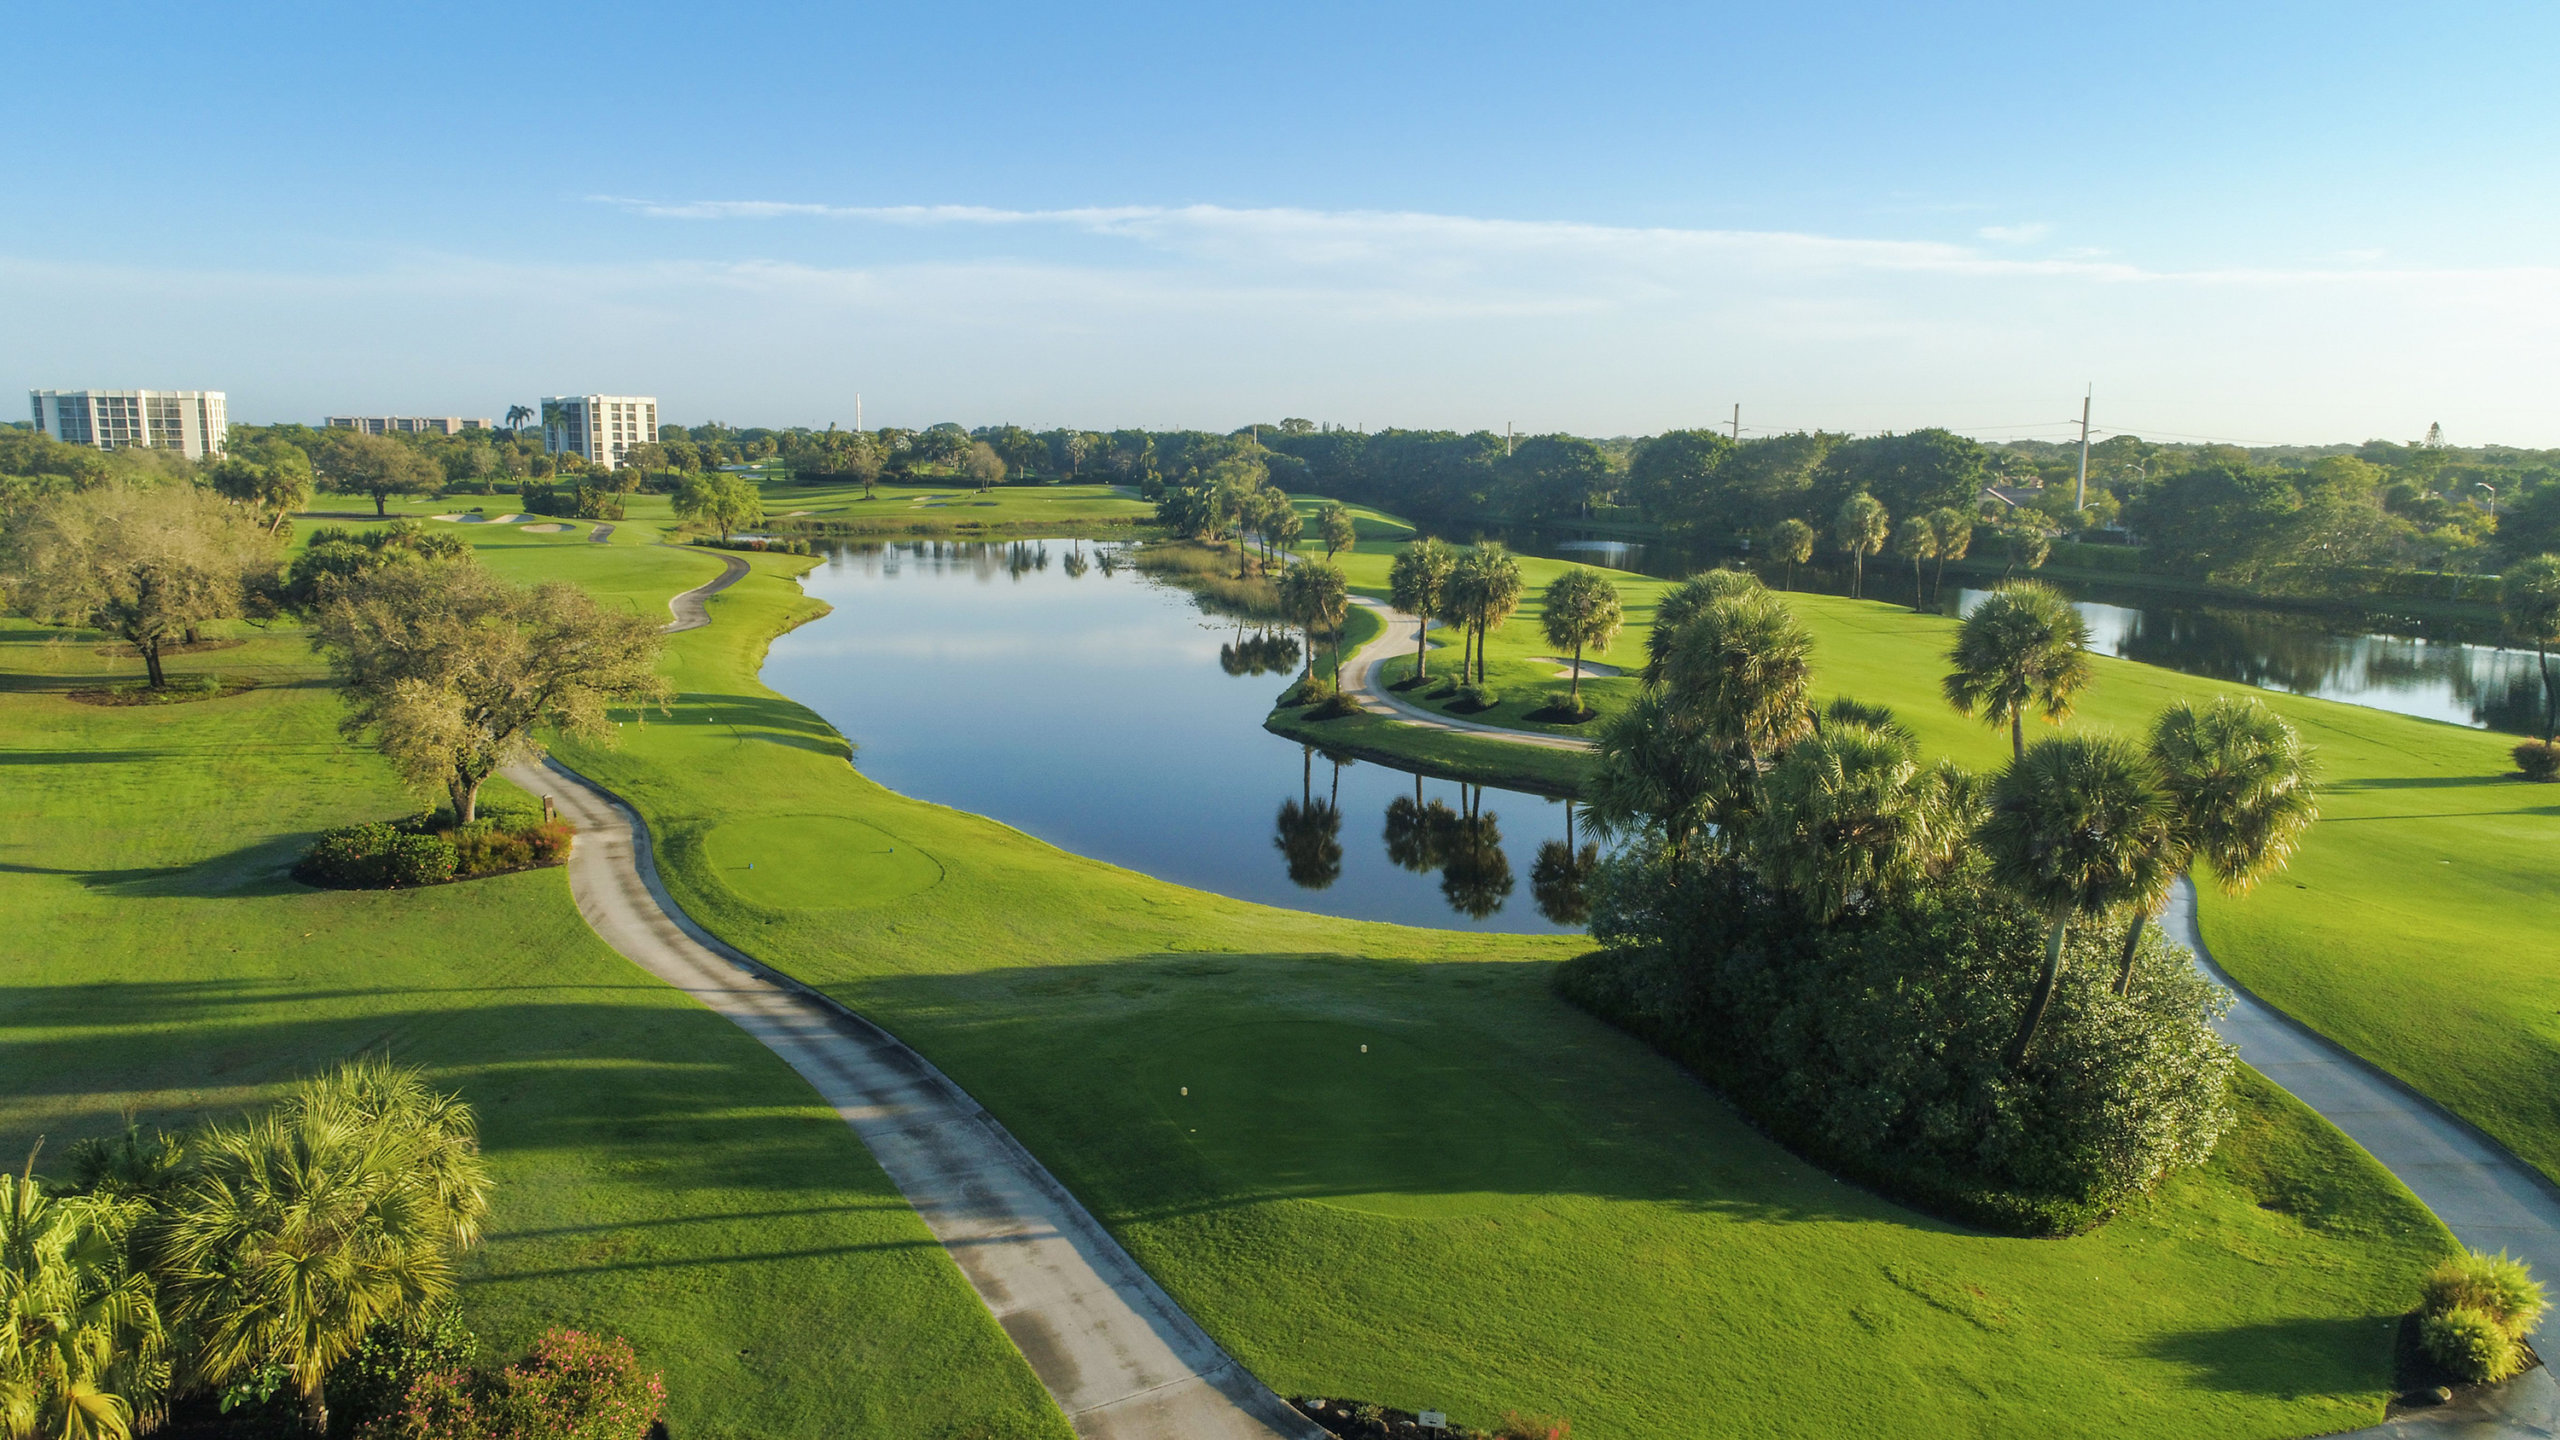 Just one are for world-class golf at Boca West Country Club